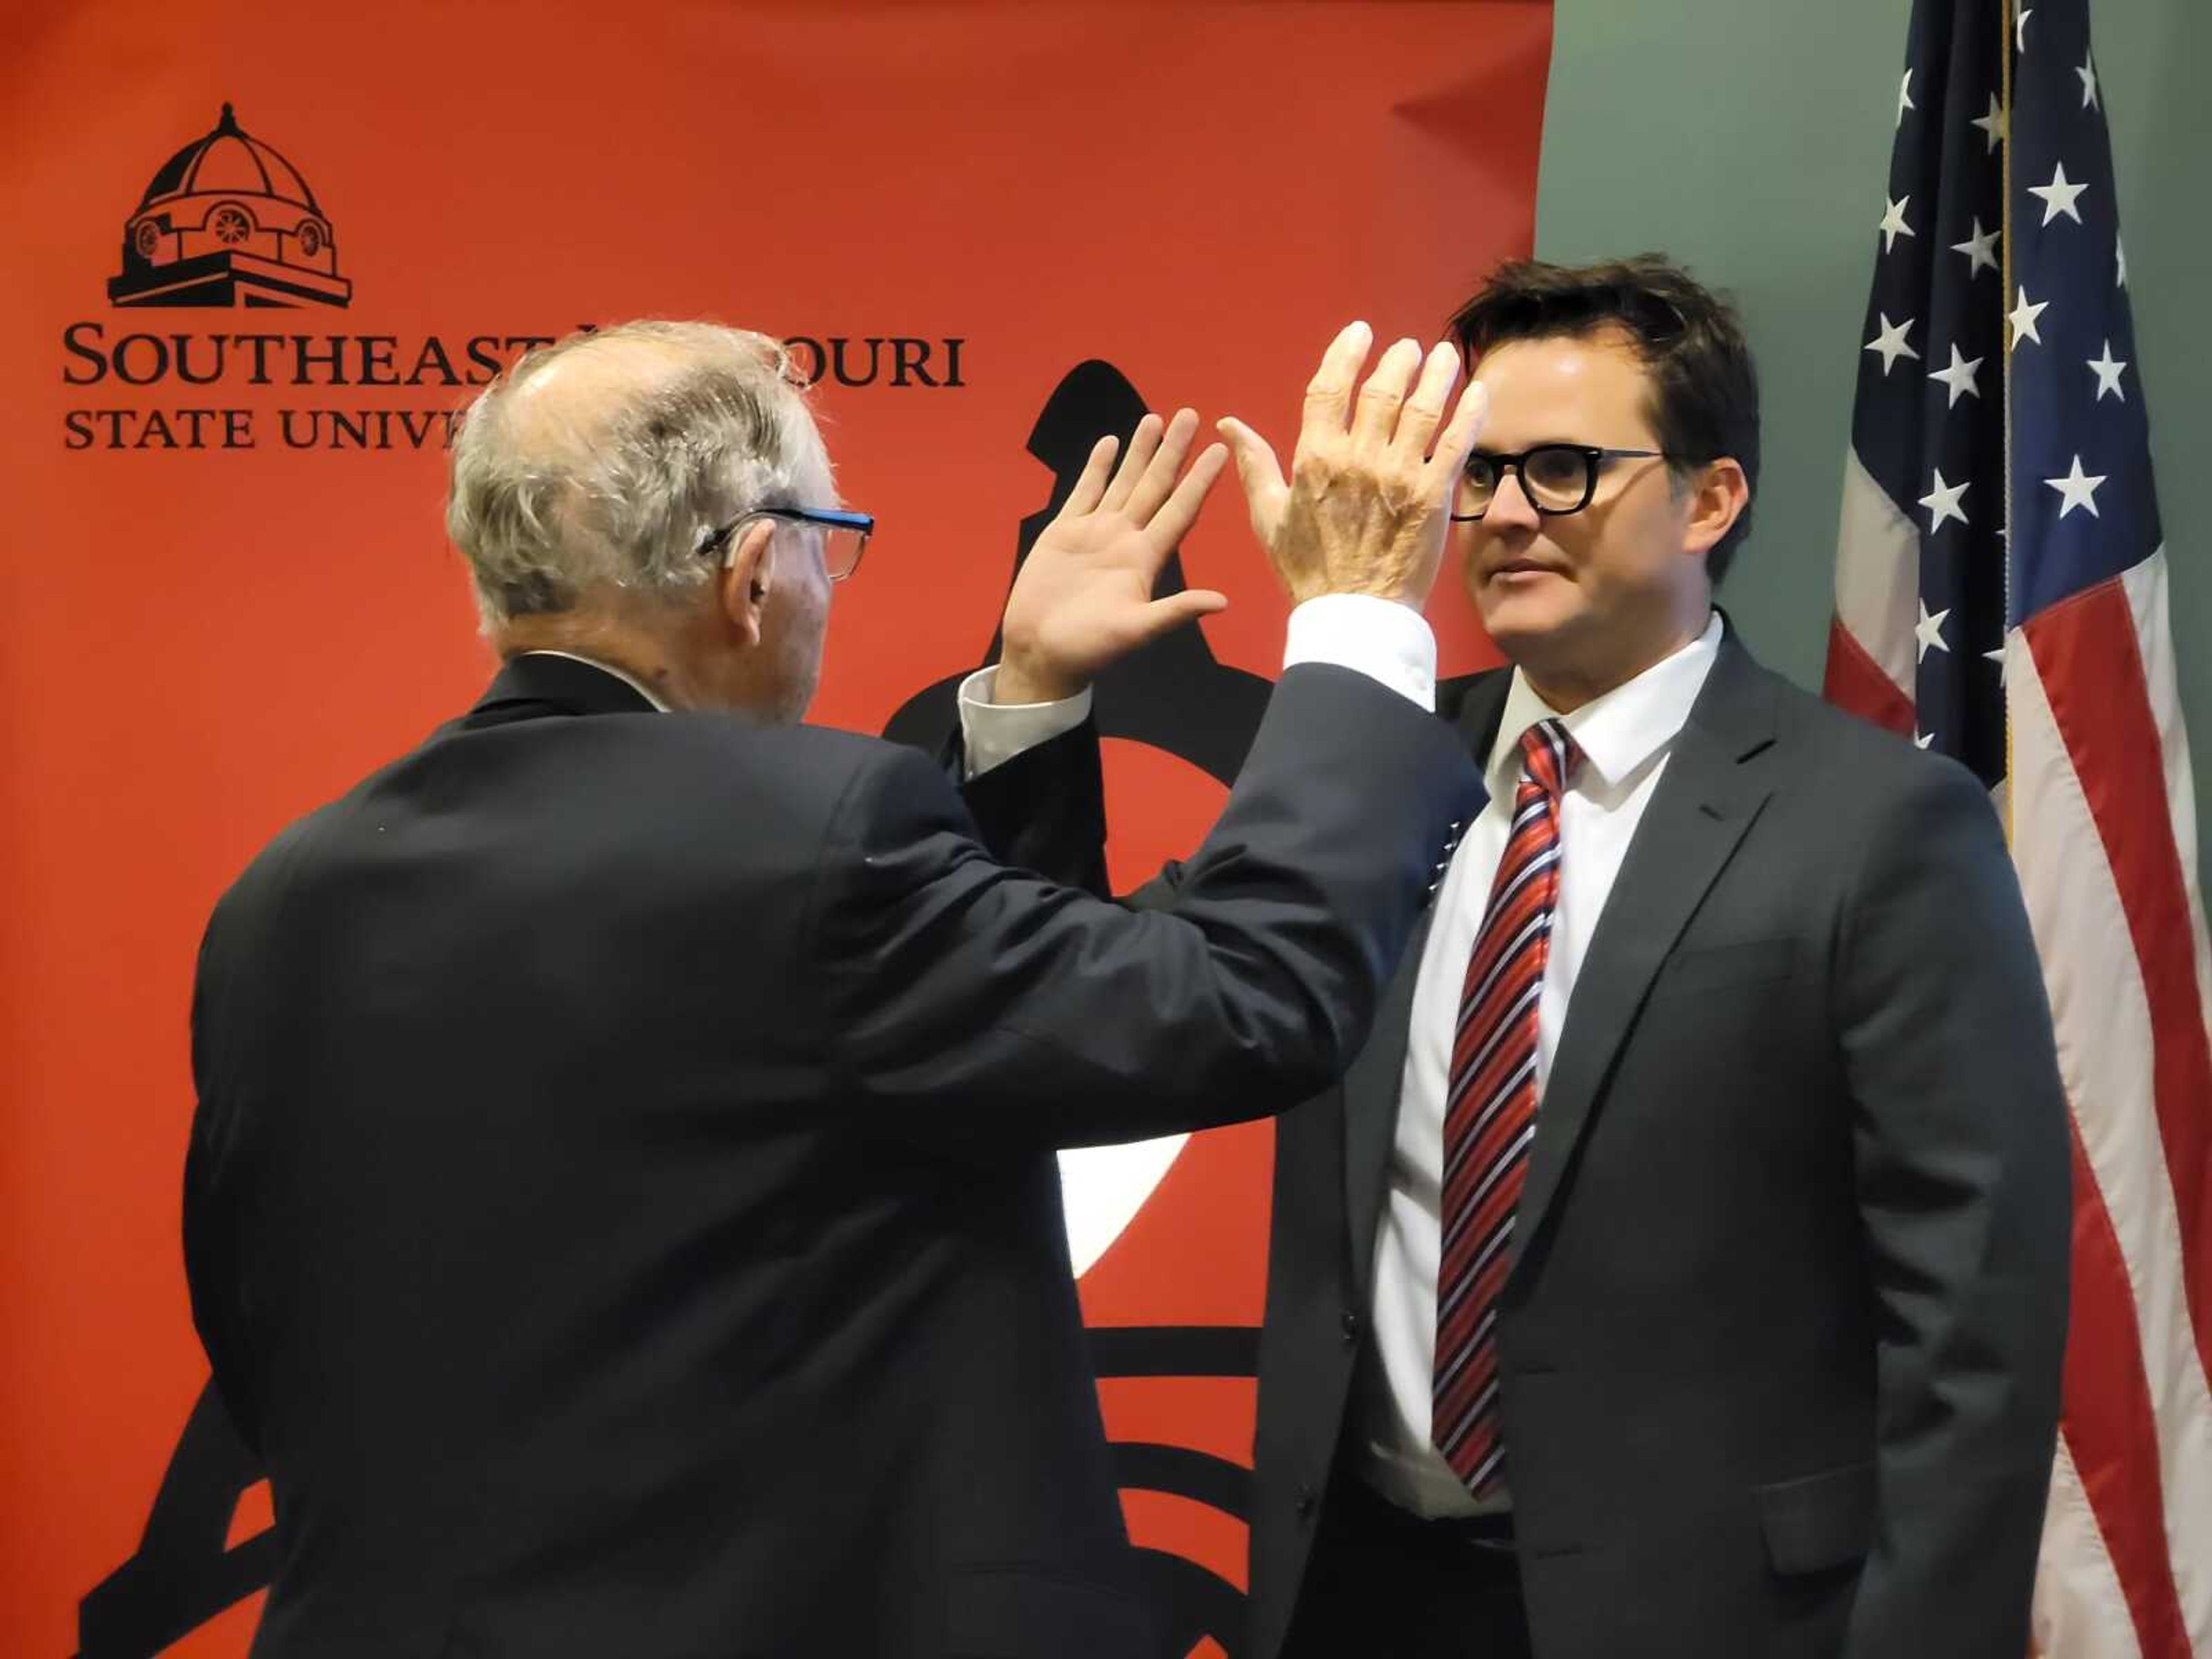 (Left) Judge Stephen Limbaugh Sr. administering (right) Dr. Andrew Moore's Oath of Office into the Board of Governors on Nov. 9 at Academic Hall. Moore was appointed to the board by Gov. Mike Parsons in Sept. 2022 and his term ends in Jan. 1 2029.